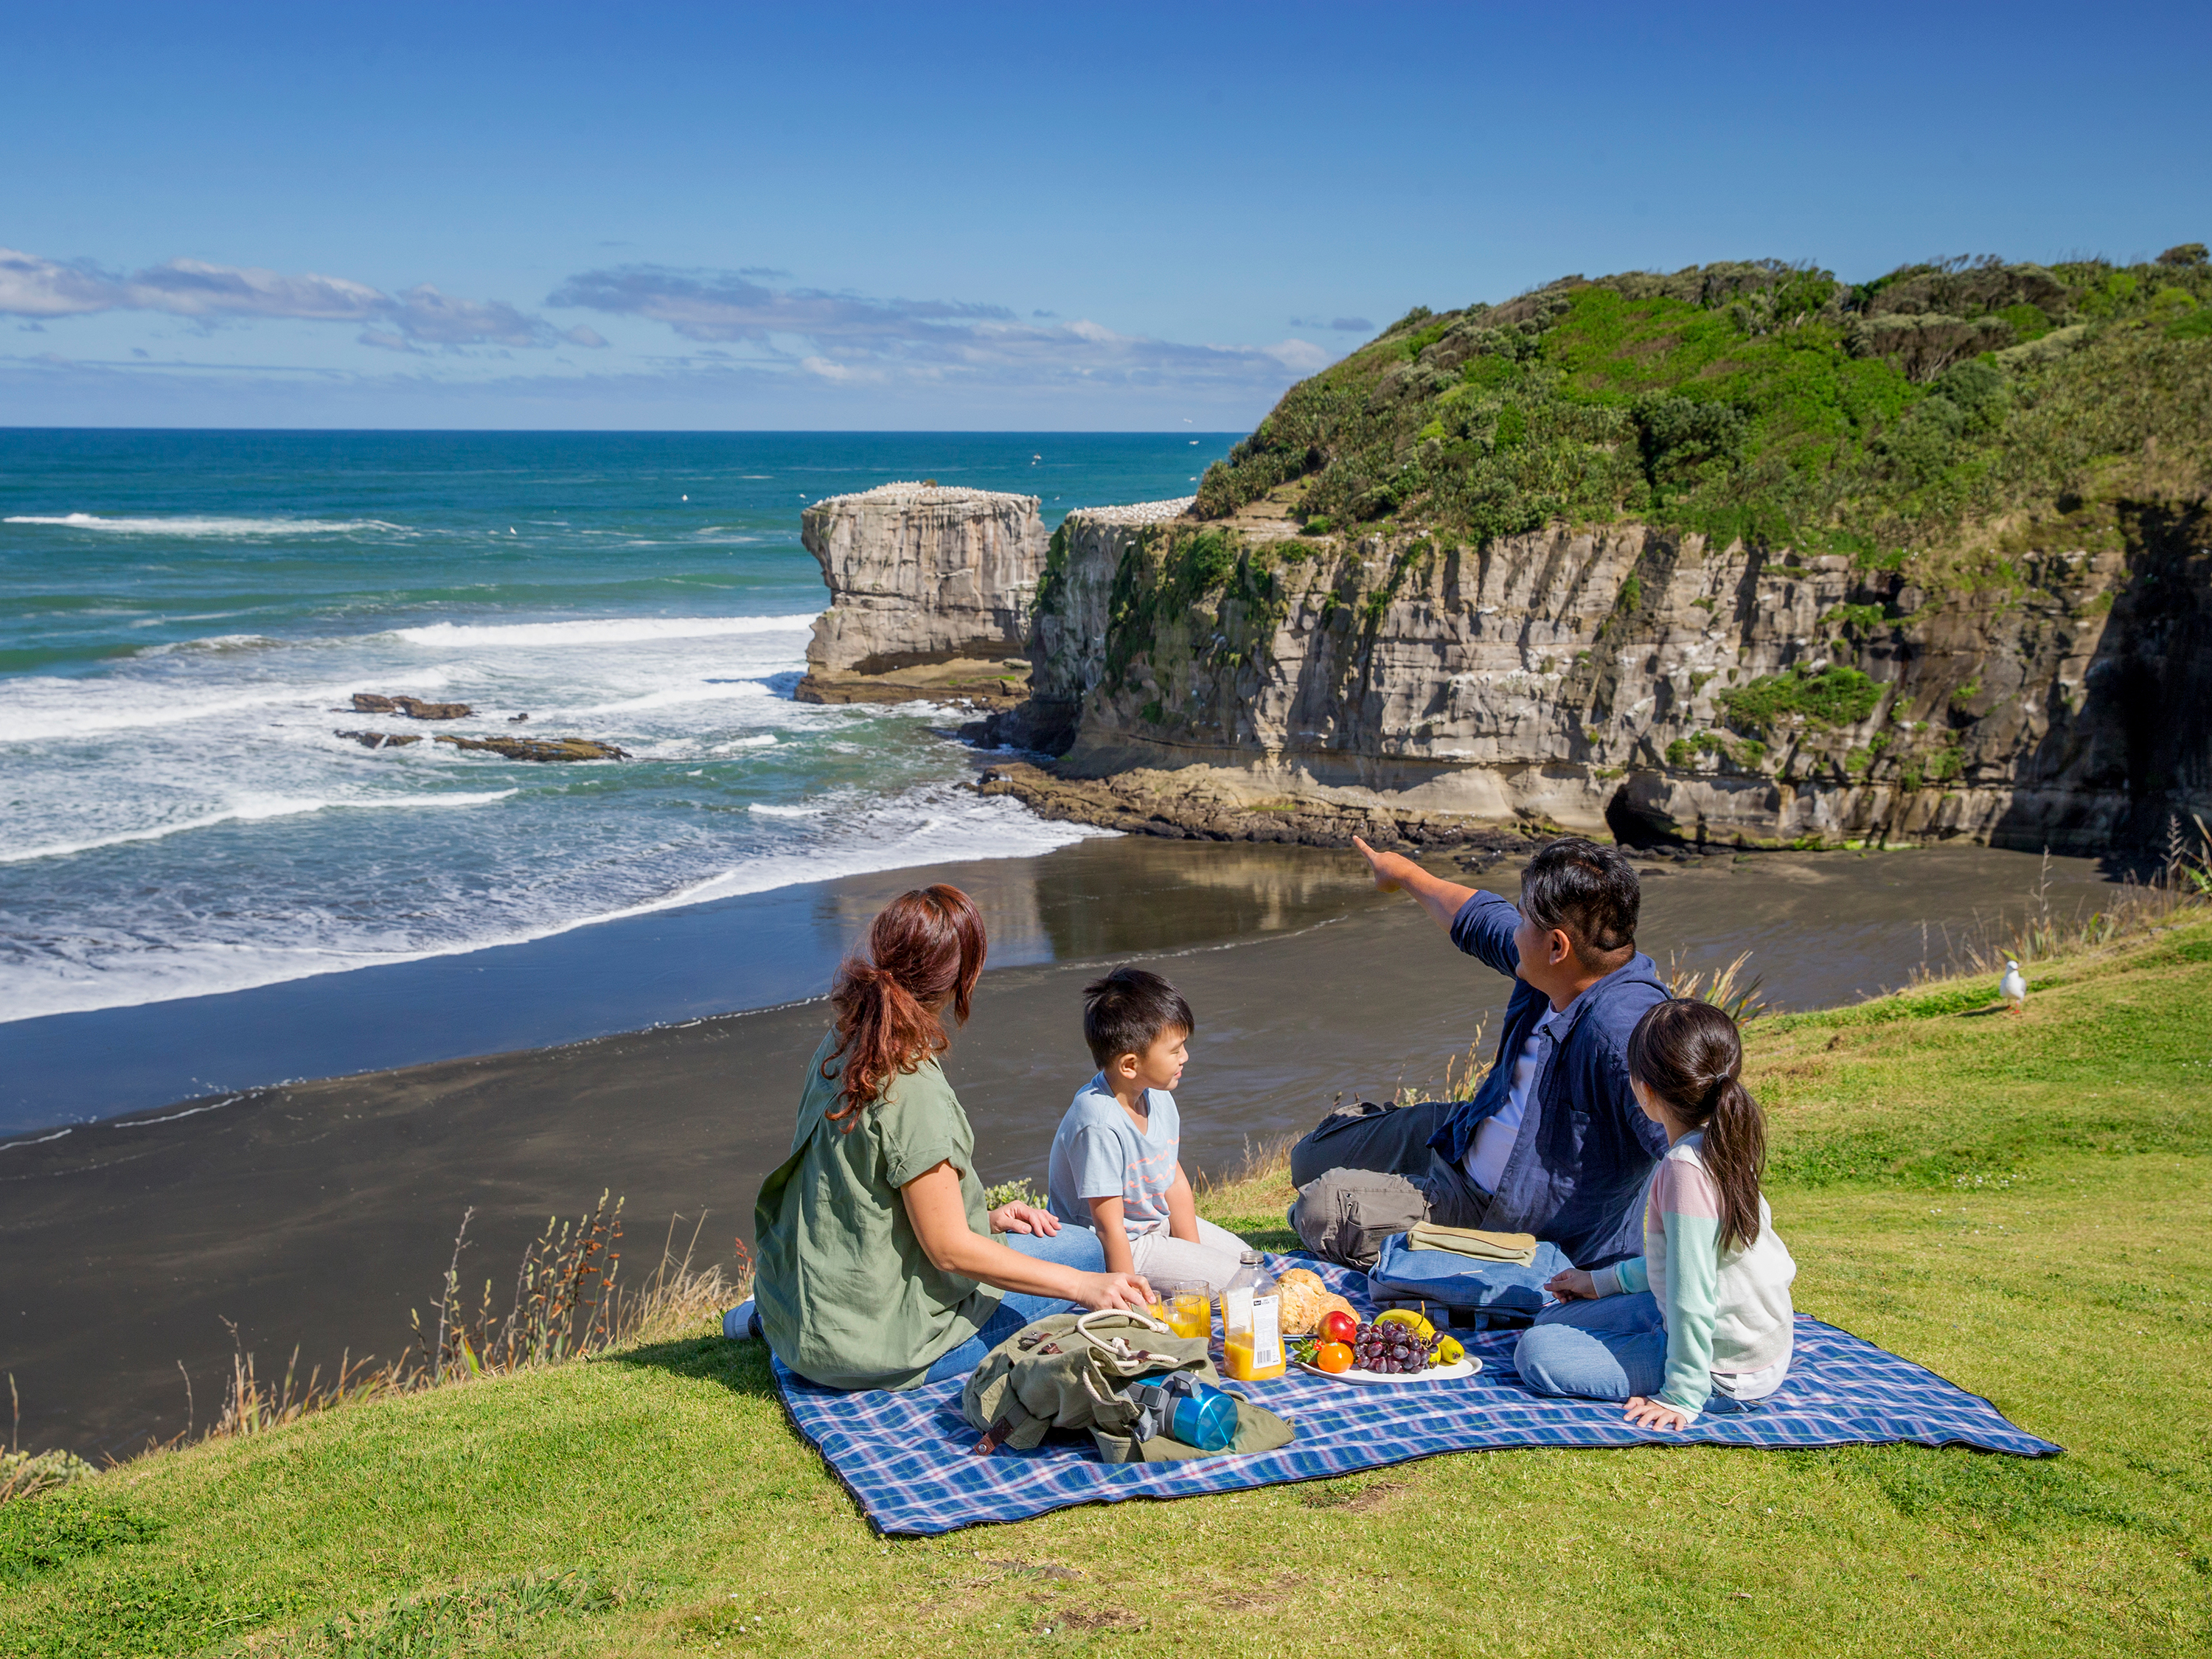 New zealand how people live